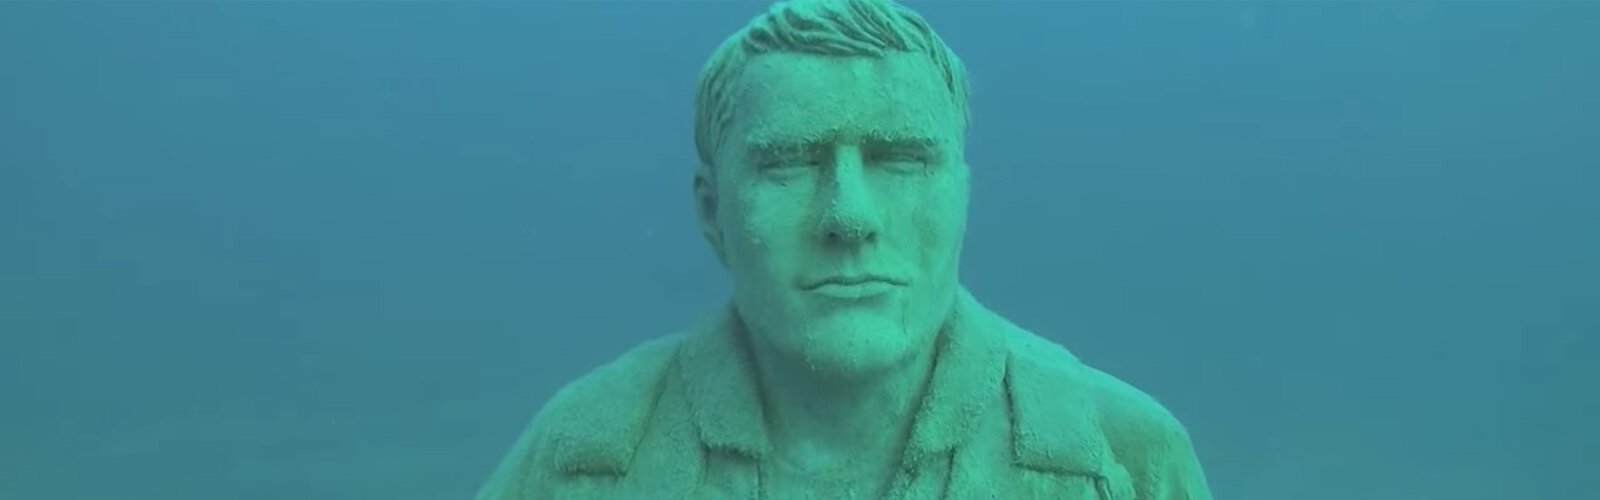 Offshore dive site near Clearwater features statues of U.S. military veterans.